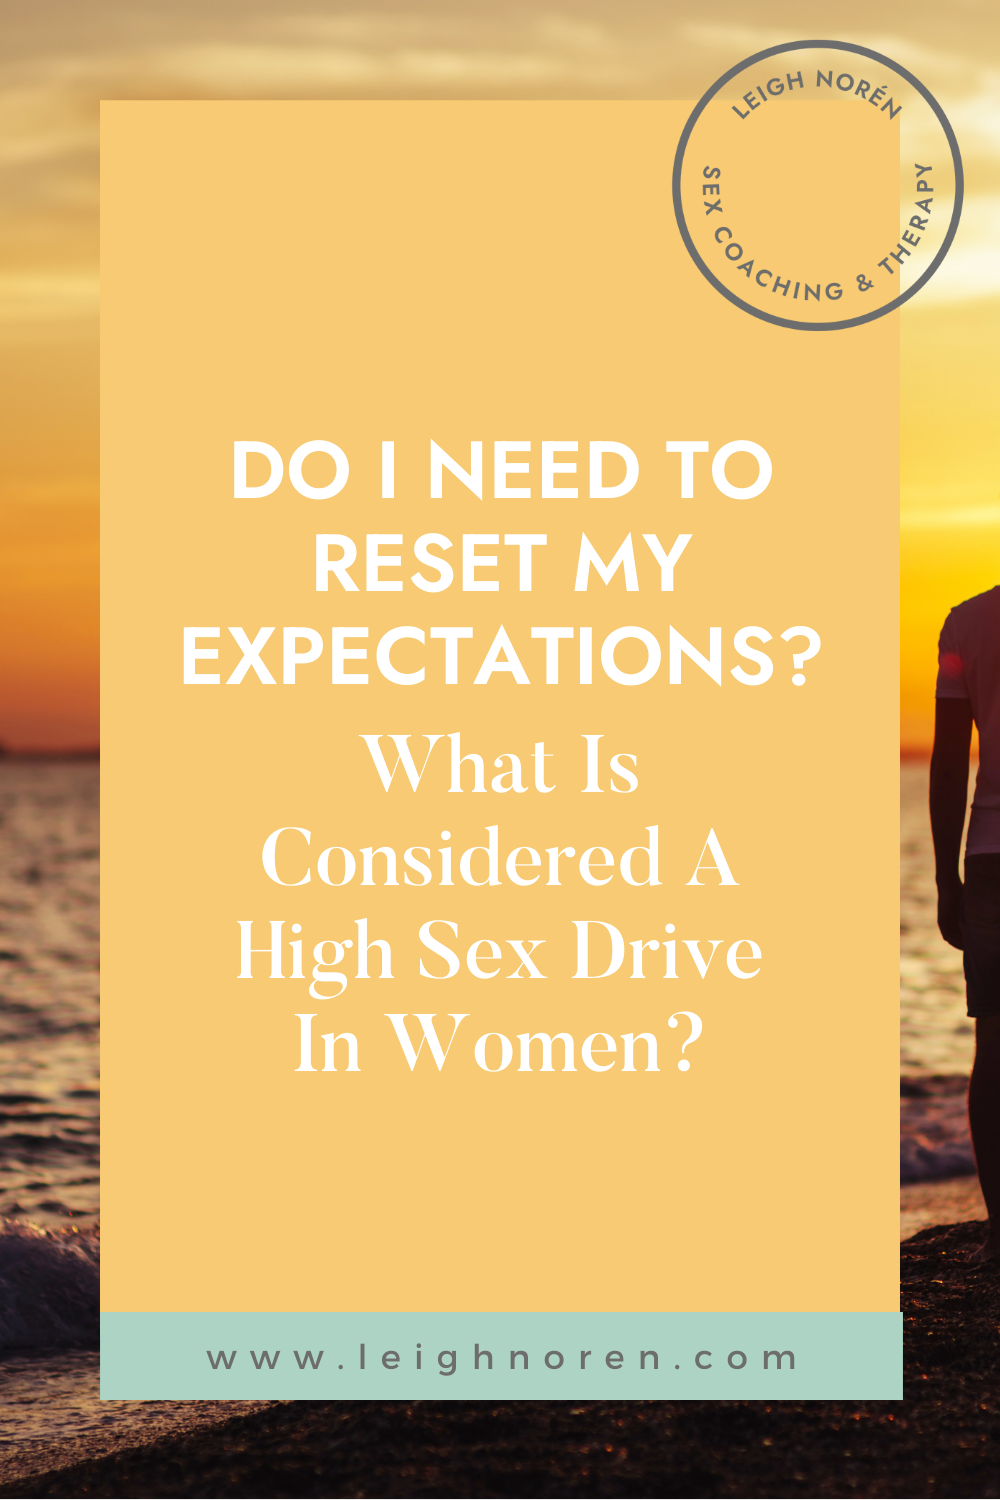 Do I Need To Reset My Expectations? What Is Considered A High Sex Drive In Women?